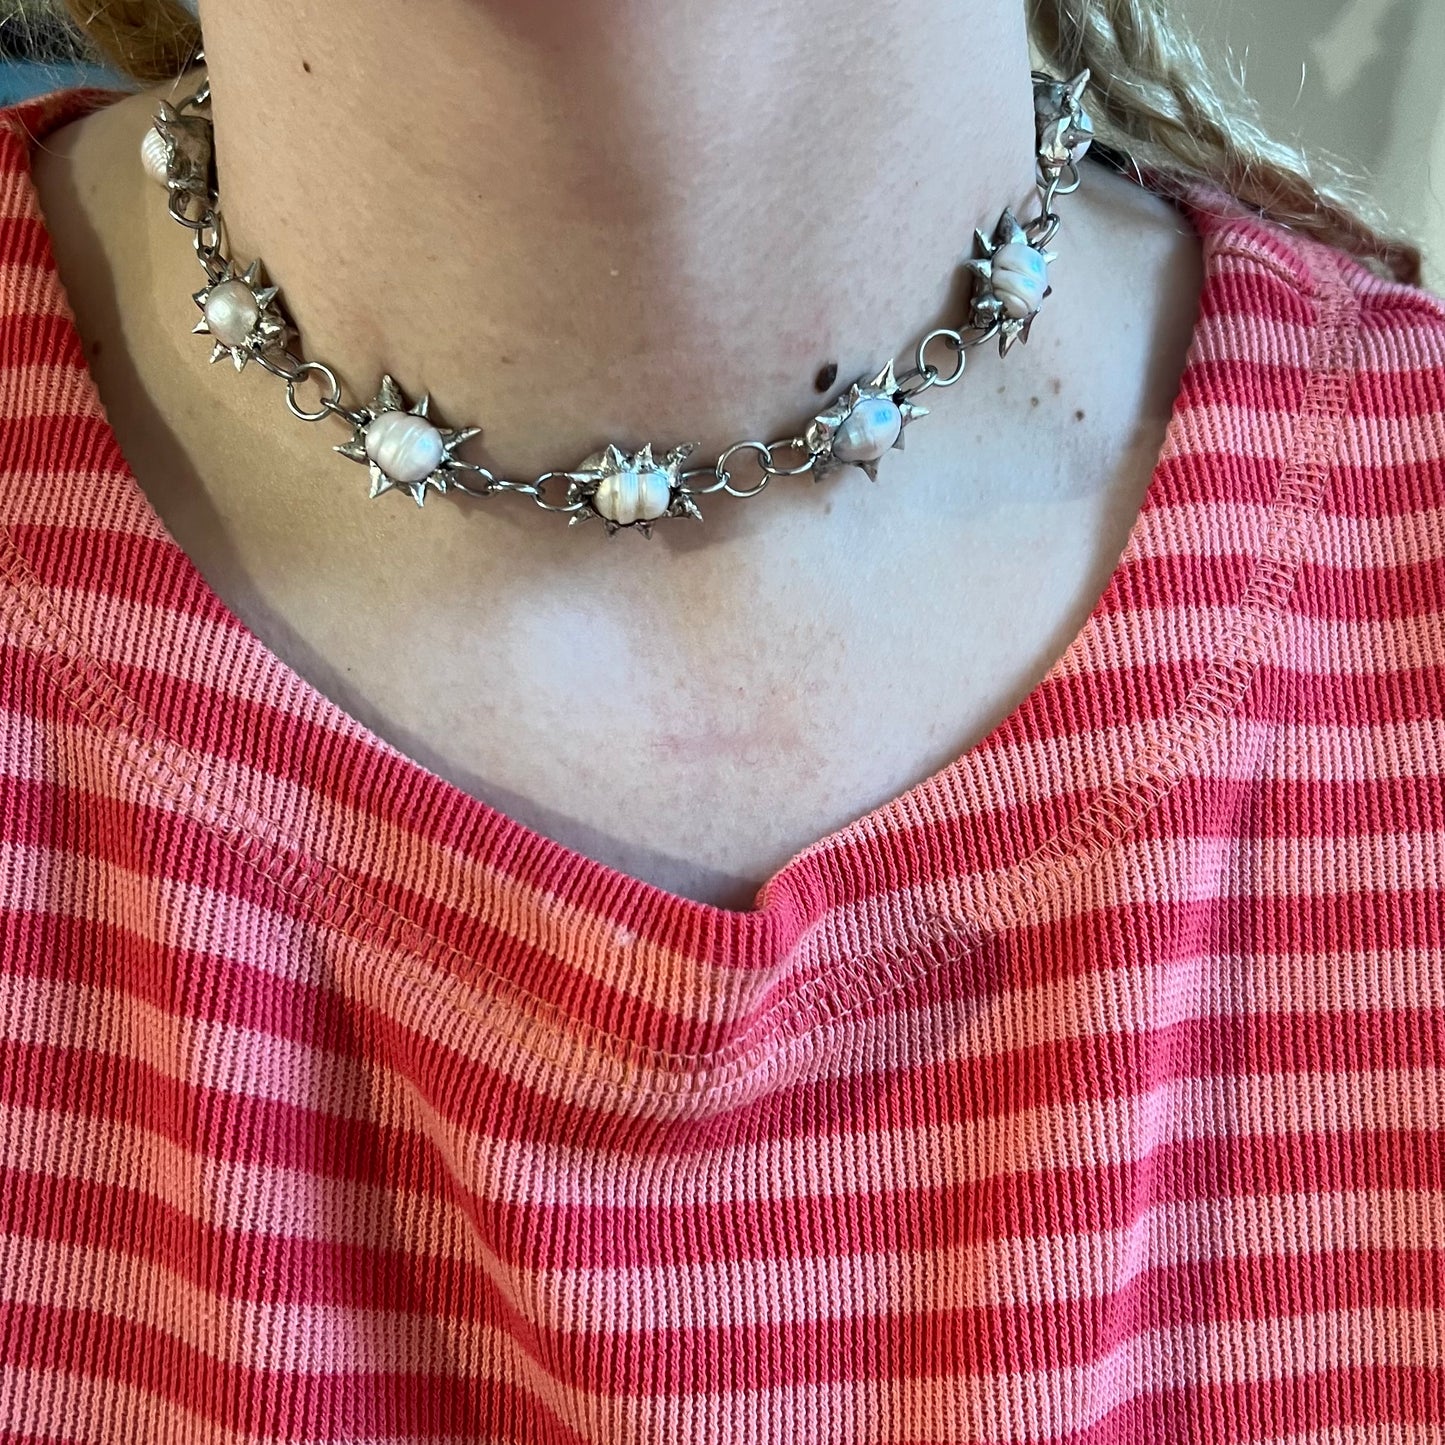 1 Spiky Pearl Necklace